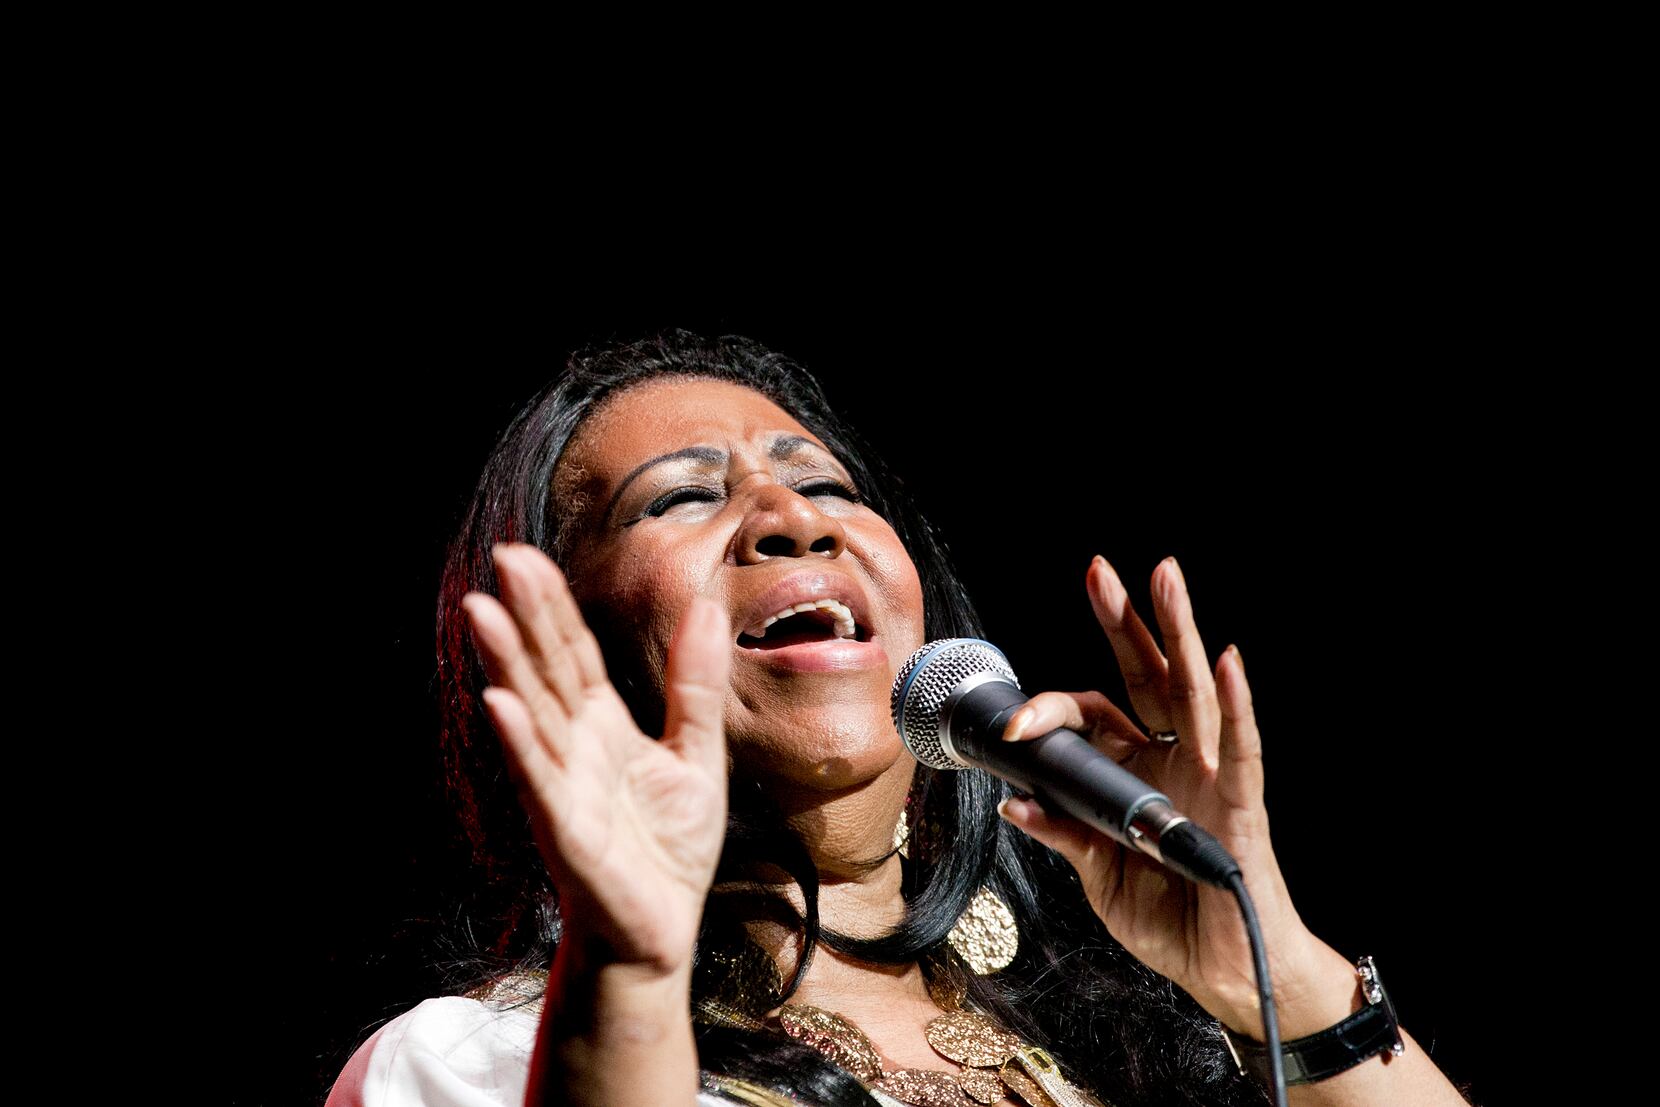 The late Aretha Franklin may not have invented soul music, but she